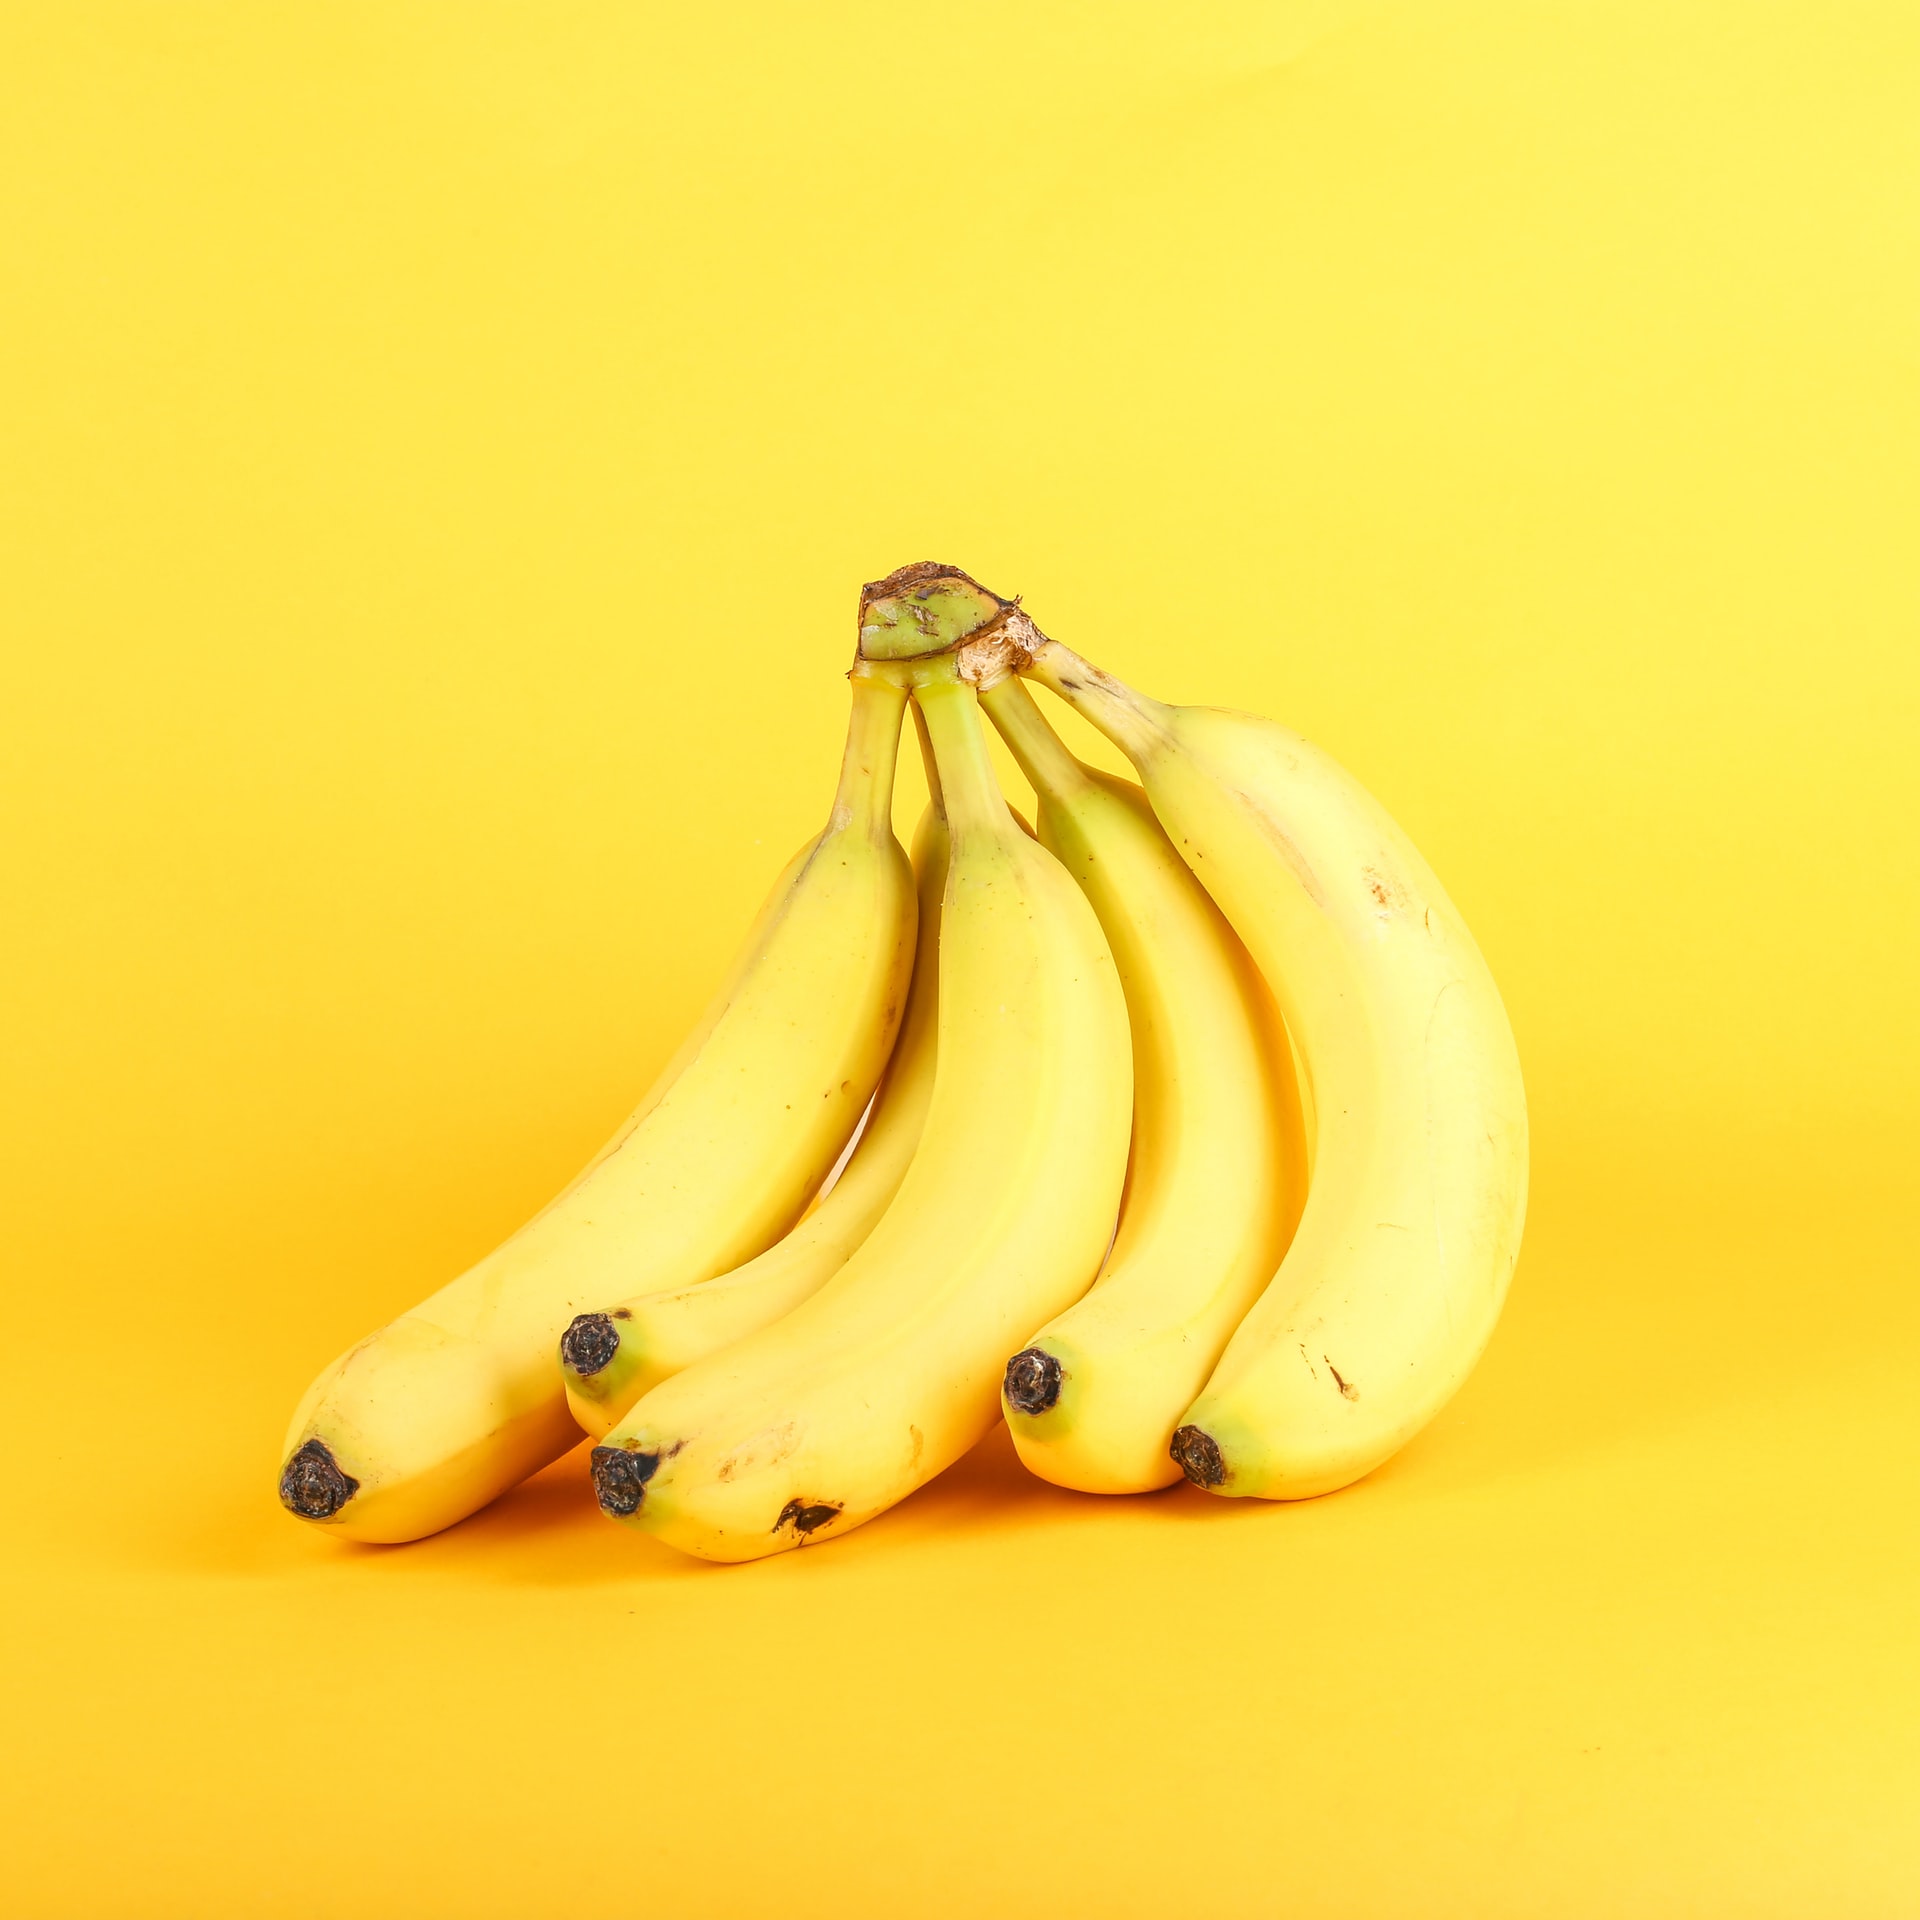 A bunch of bananas on a yellow background